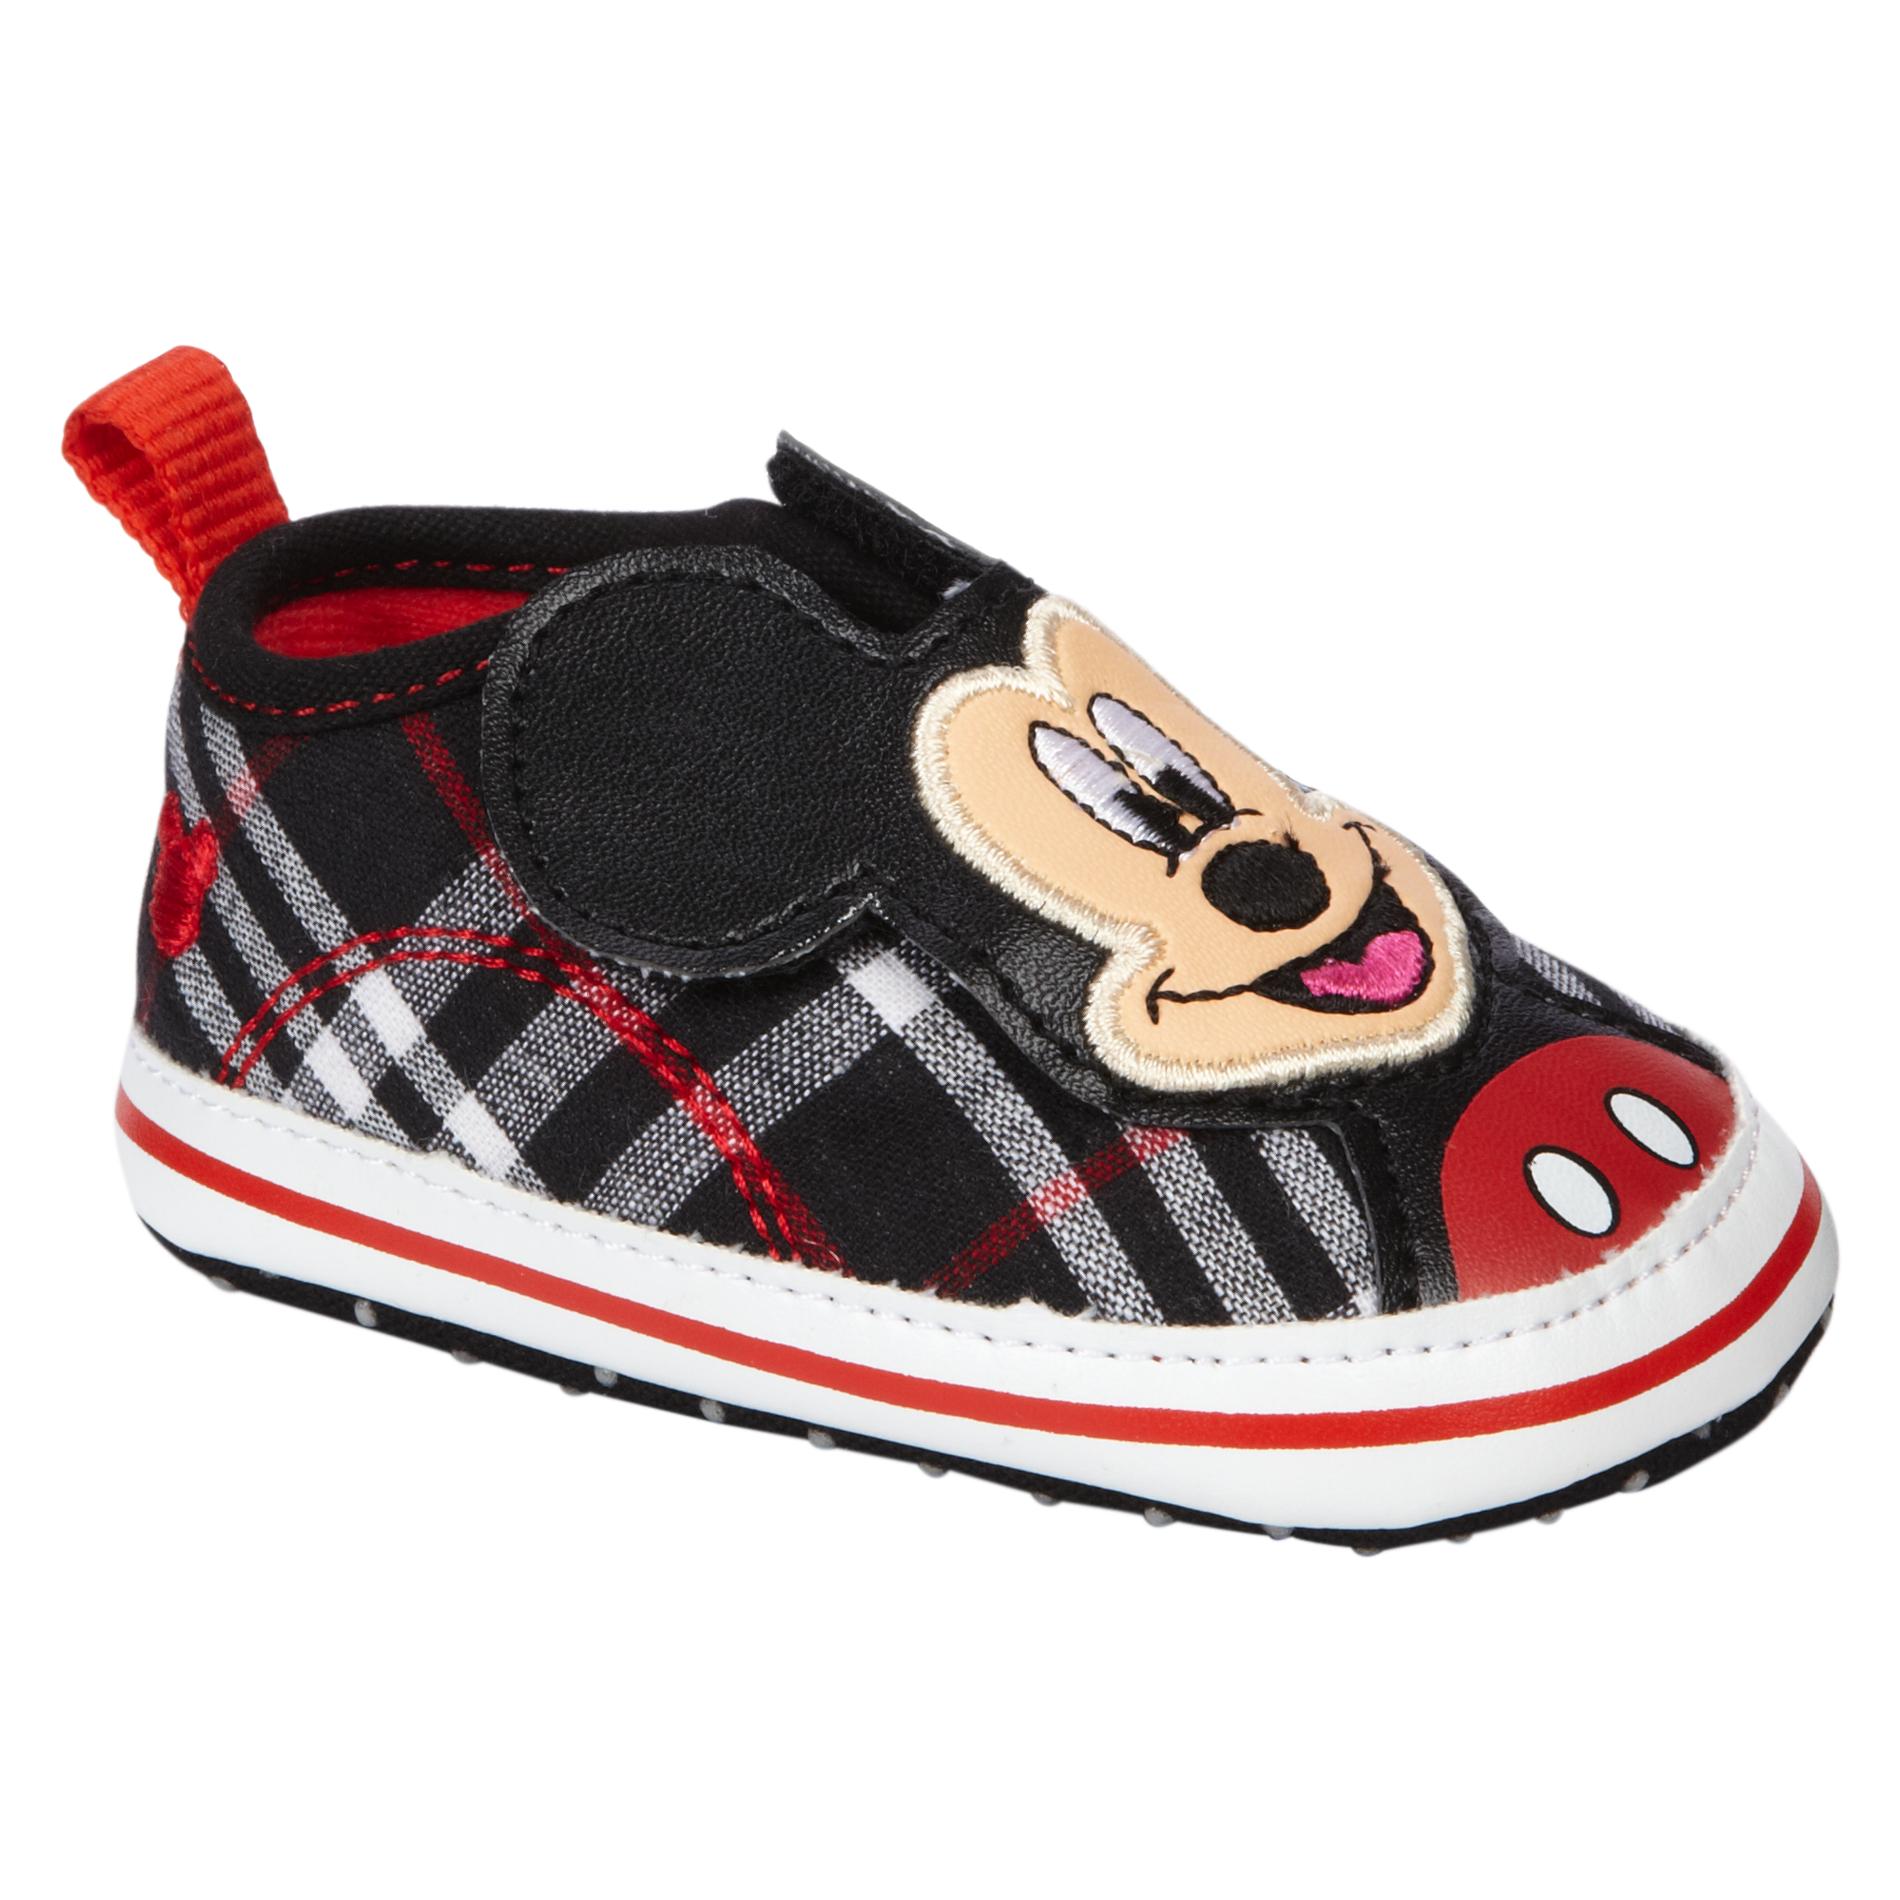 Disney Baby Boy's Casual Mickey Face - Red